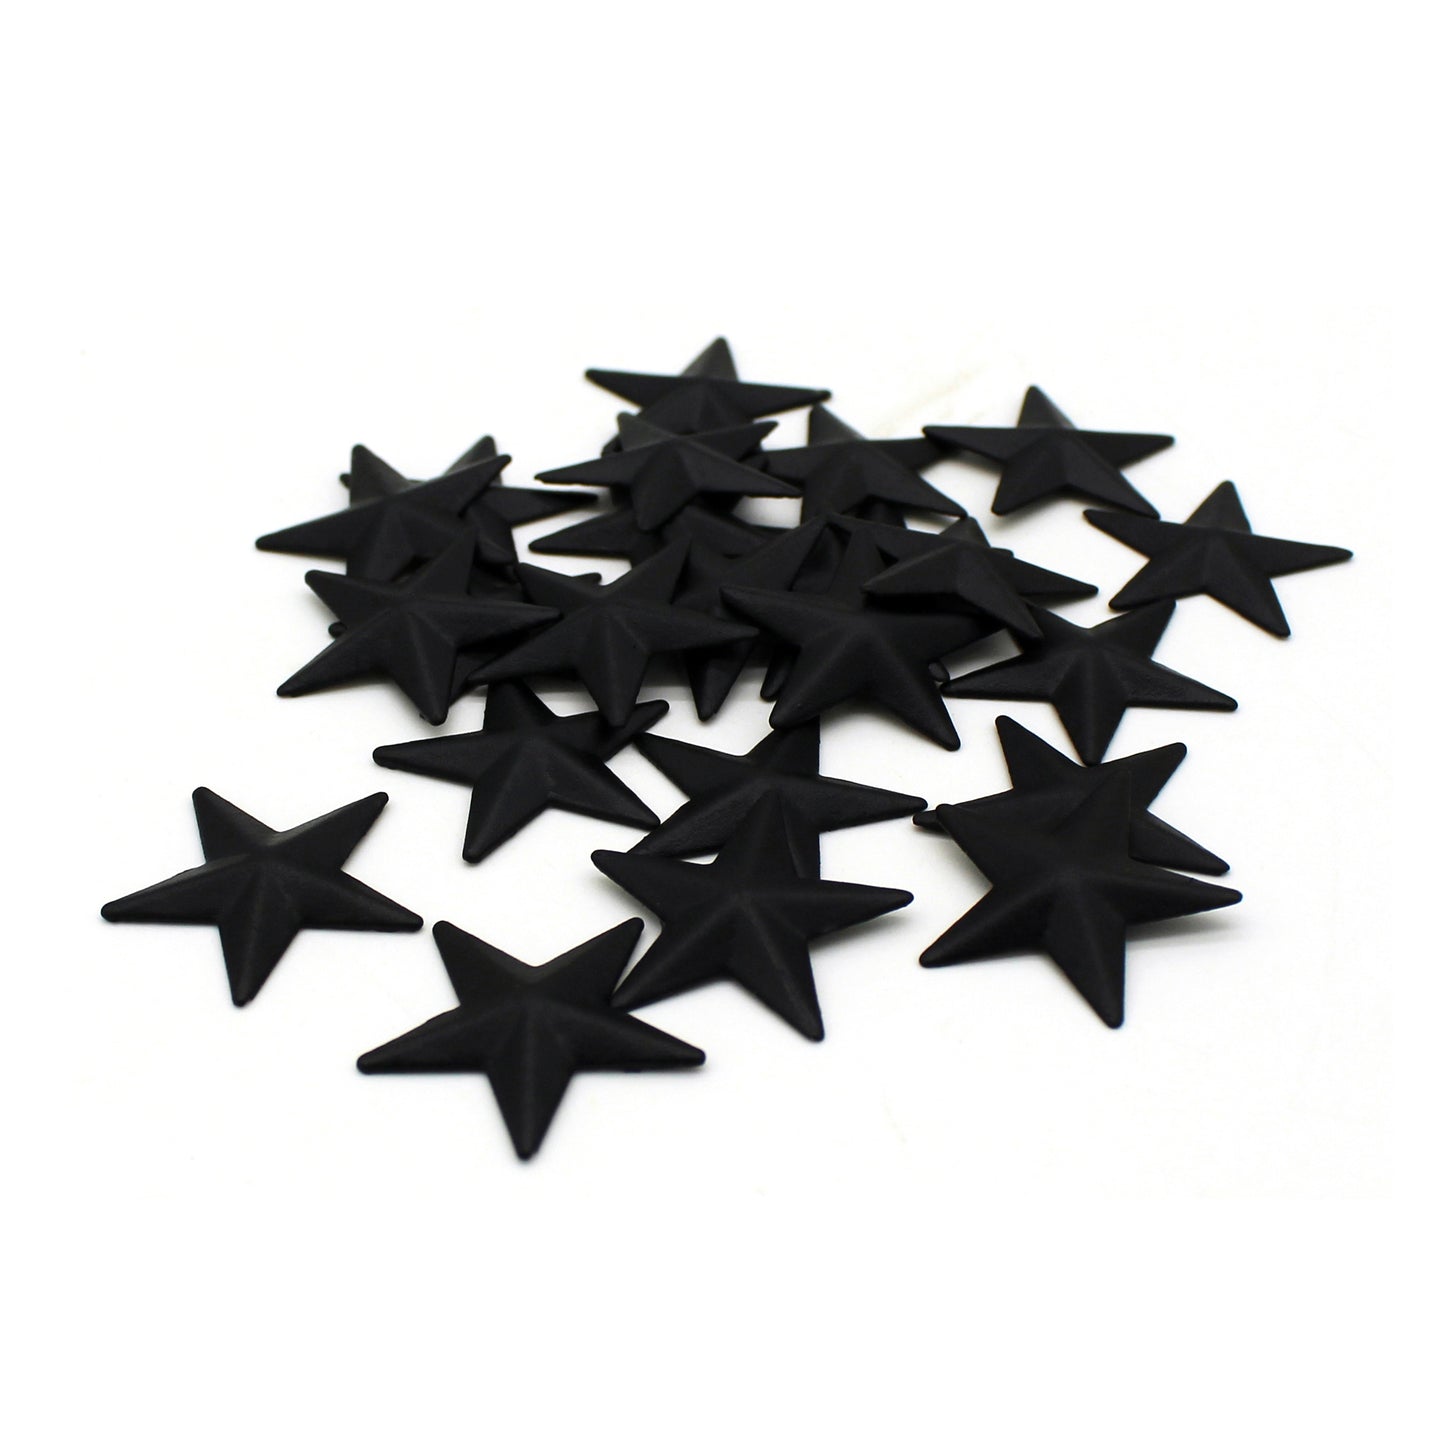 CVHOMEDECO. Primitives Rustic Country Décor. Black Mini Metal Barn Star Home Decorative Accents, 1 Inch, Set of 24